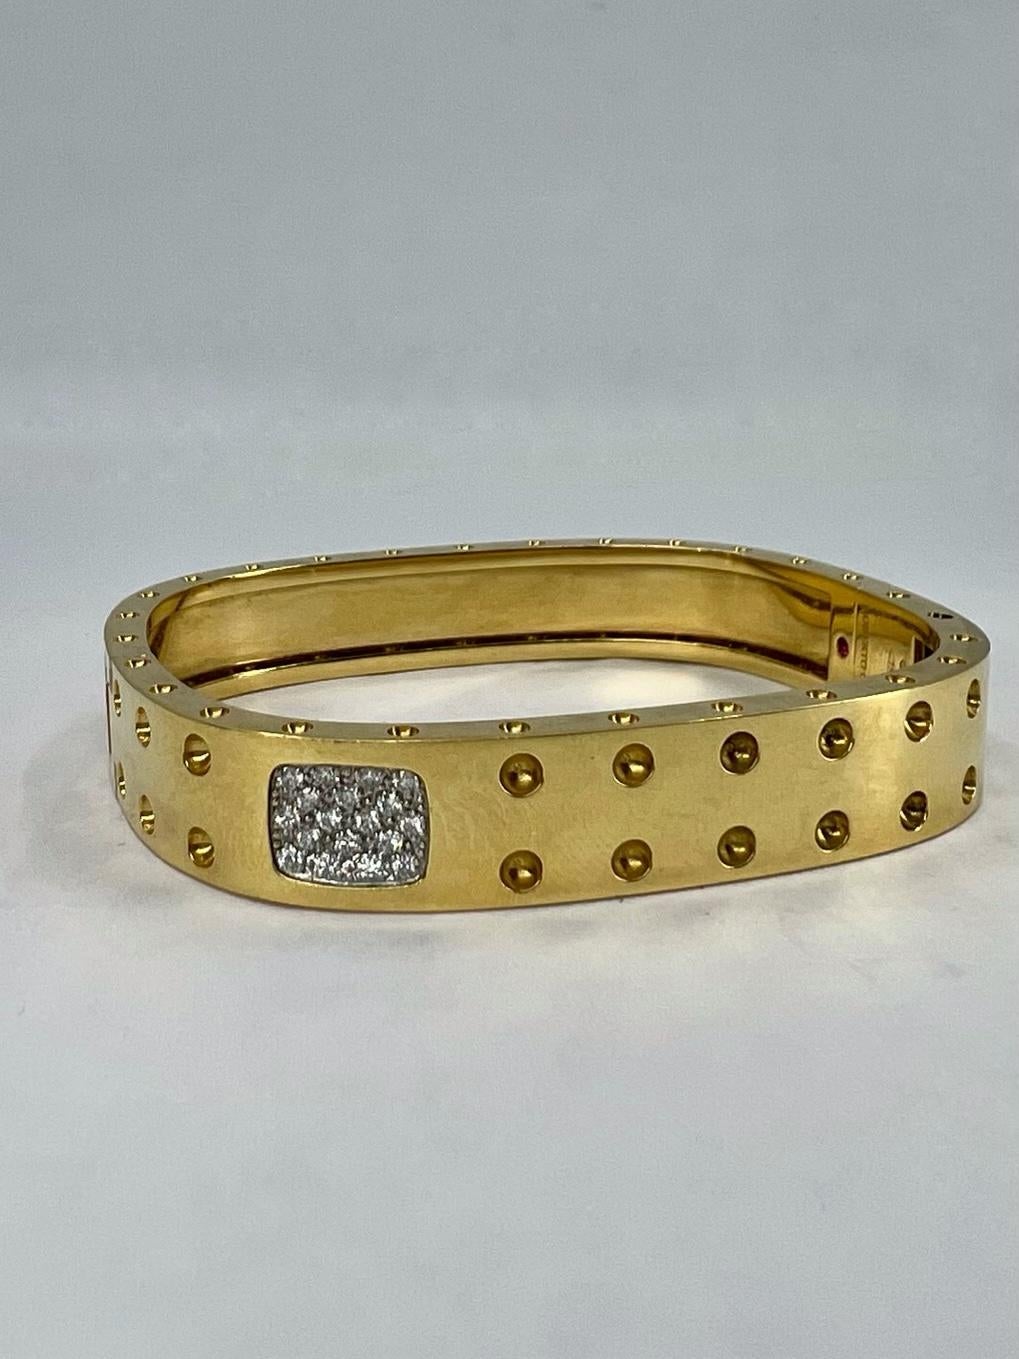 An iconic Pois Moi bangle by Roberto Coin, made of 18k gold, features diamond.
It’s a two-row version of a Pois Moi bracelet. The bangle is decorated with the tiny craters set on the surface and the edge of the bracelet. These dots placed on